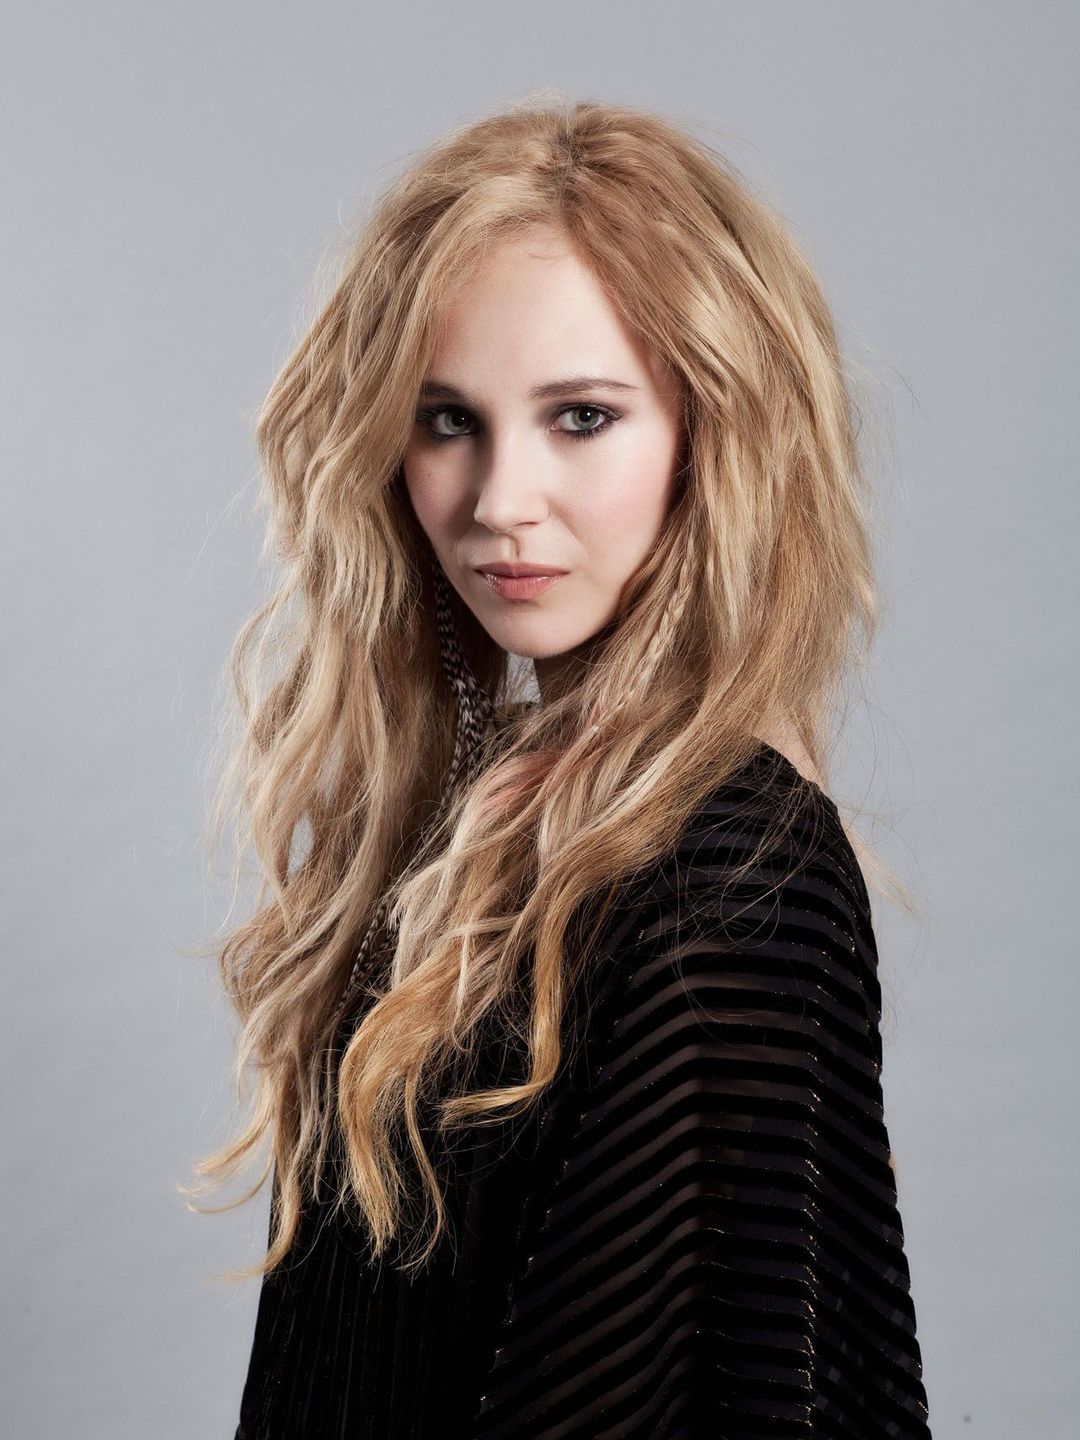 Juno Temple who is she